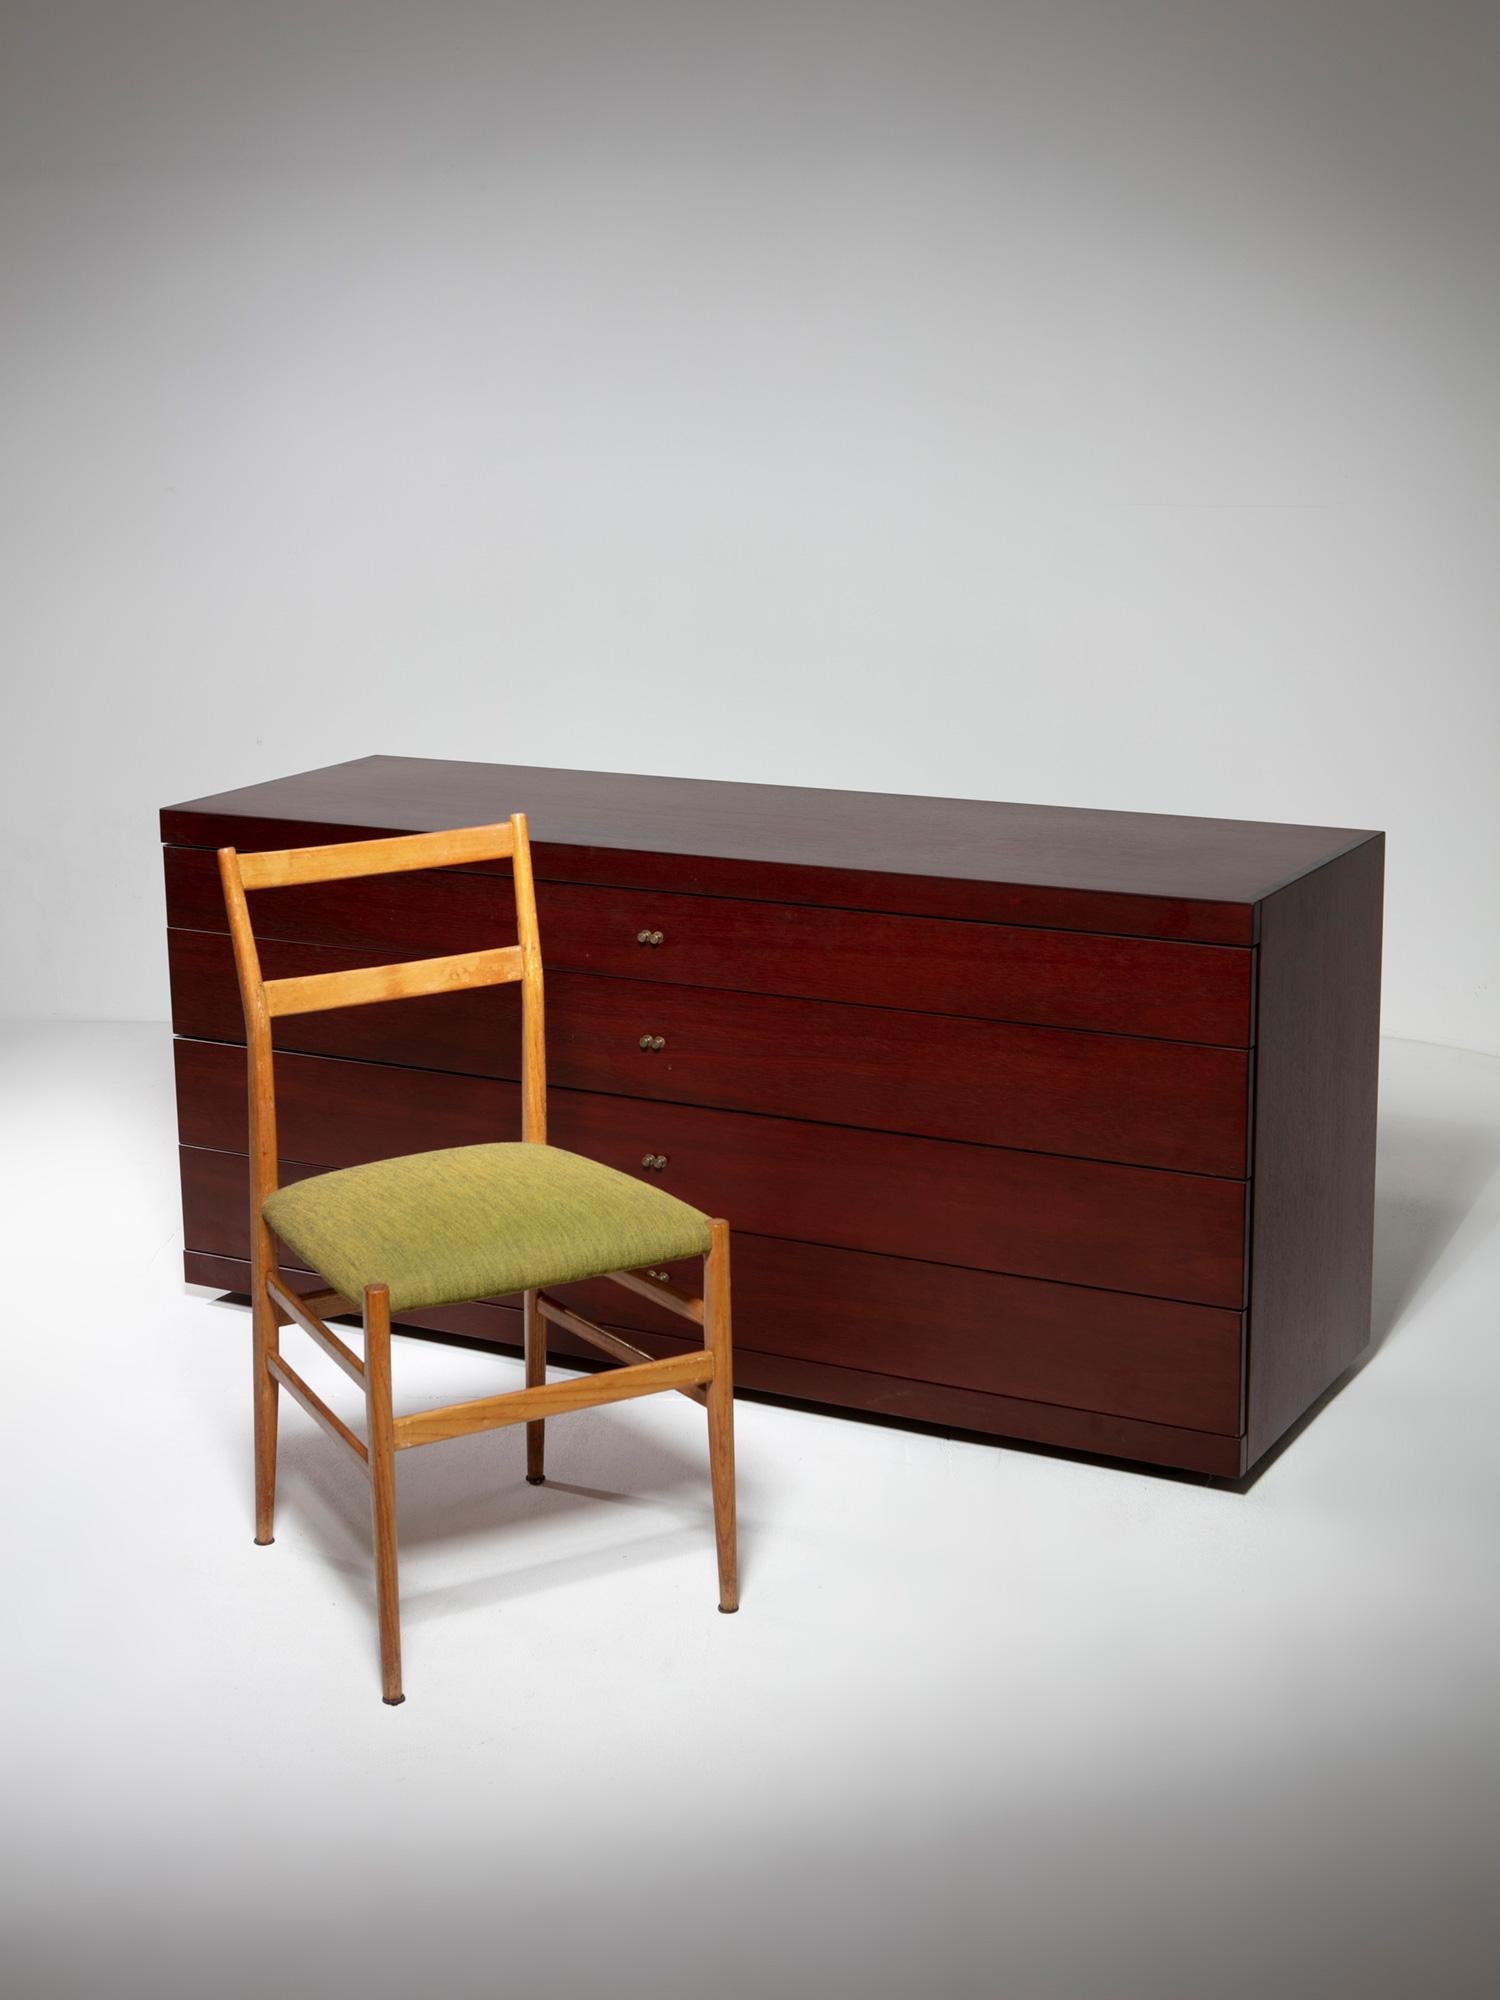 Capable MB84 Wood Chest of Drawers by Roberto Poggi for Poggi, Italy, 1990s For Sale 4